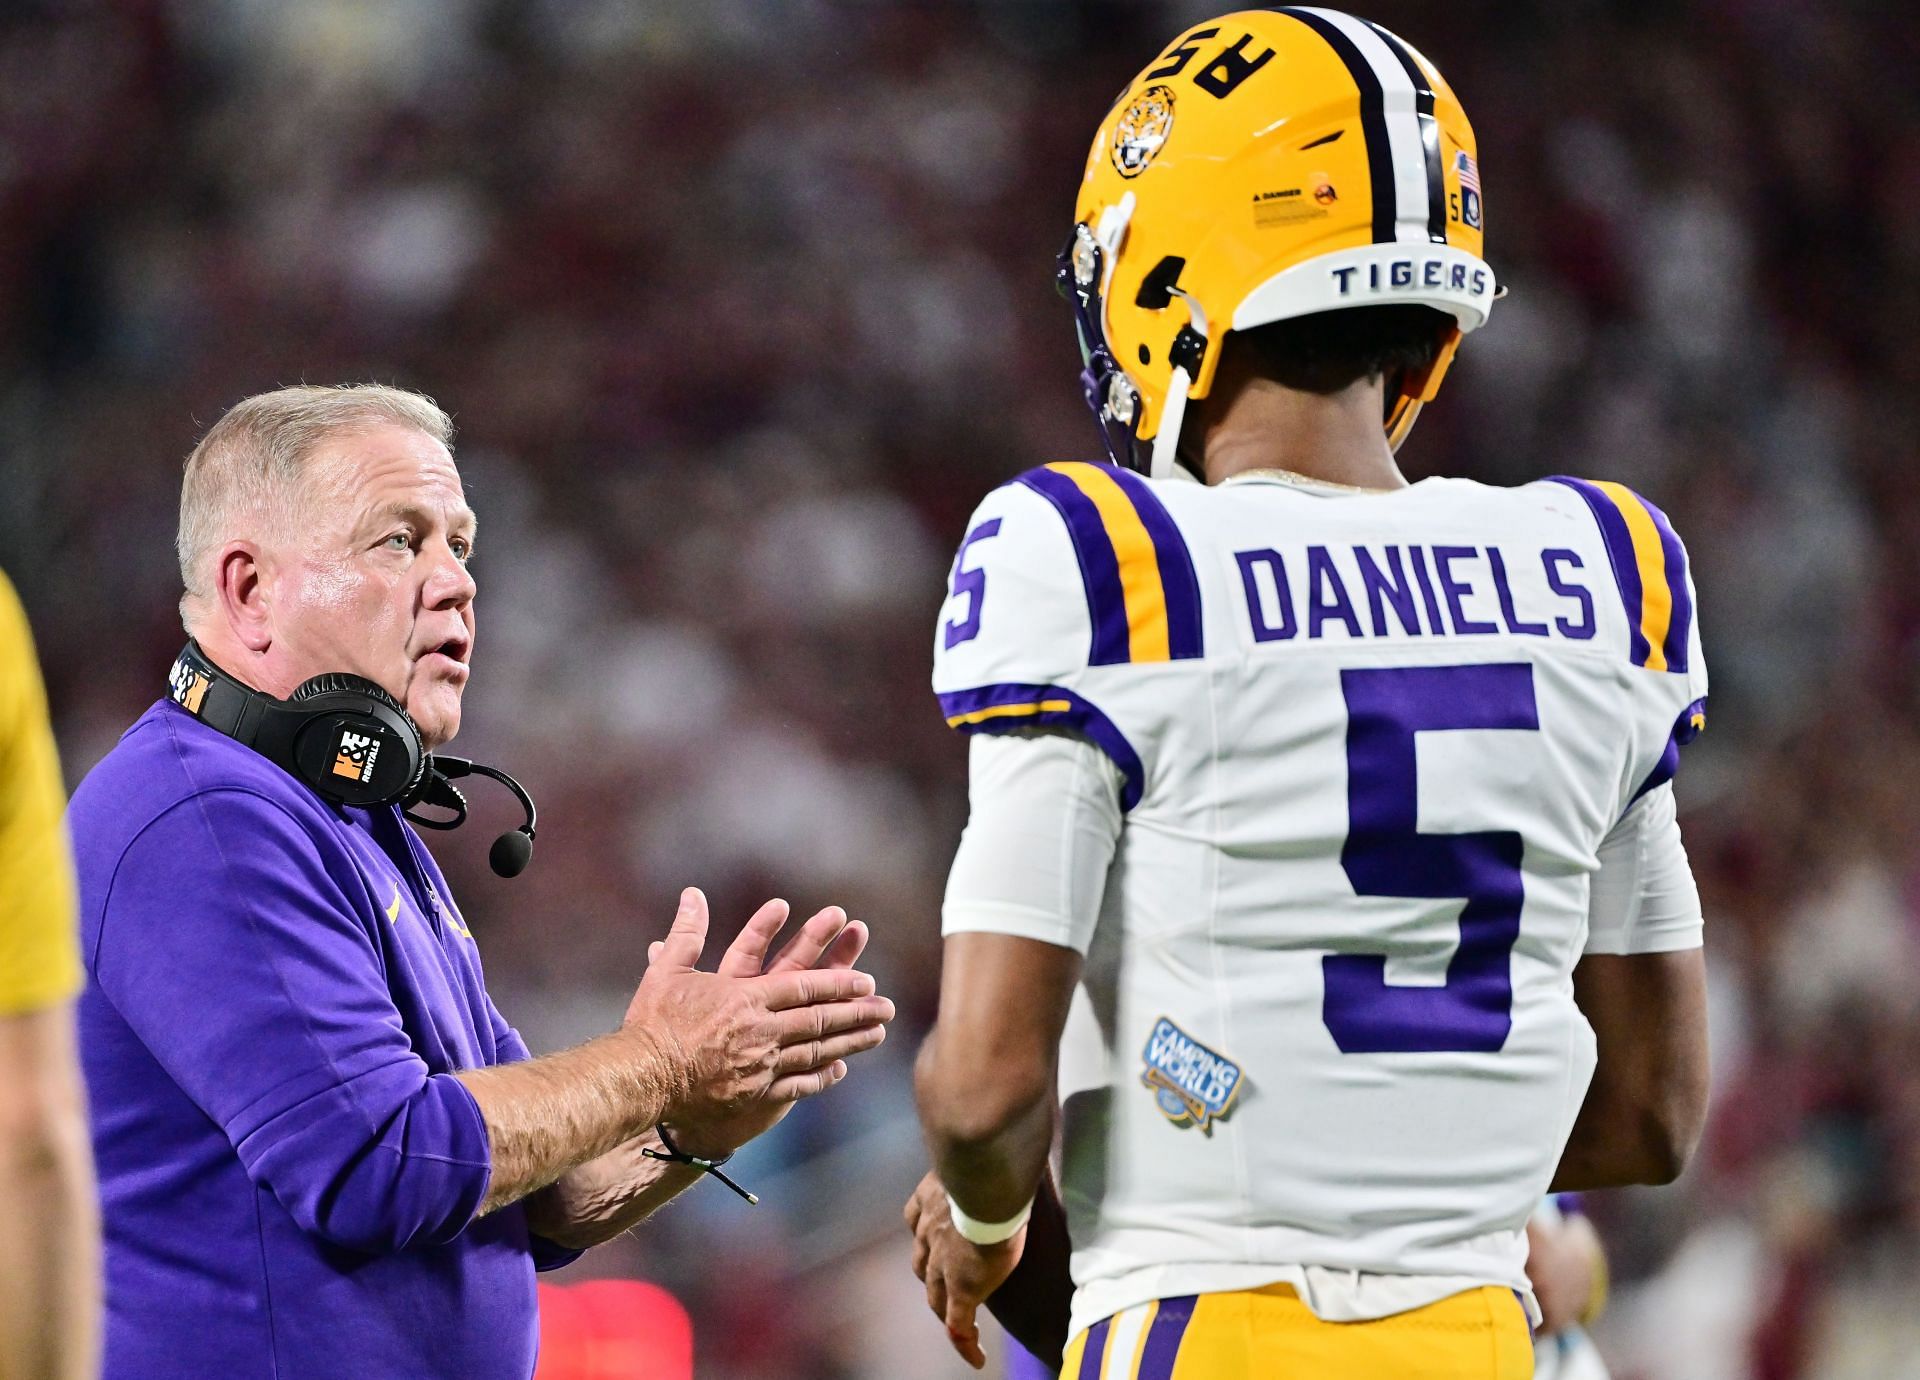 LSU coach Brian Kelly voices out instructions to Jayden Daniels.